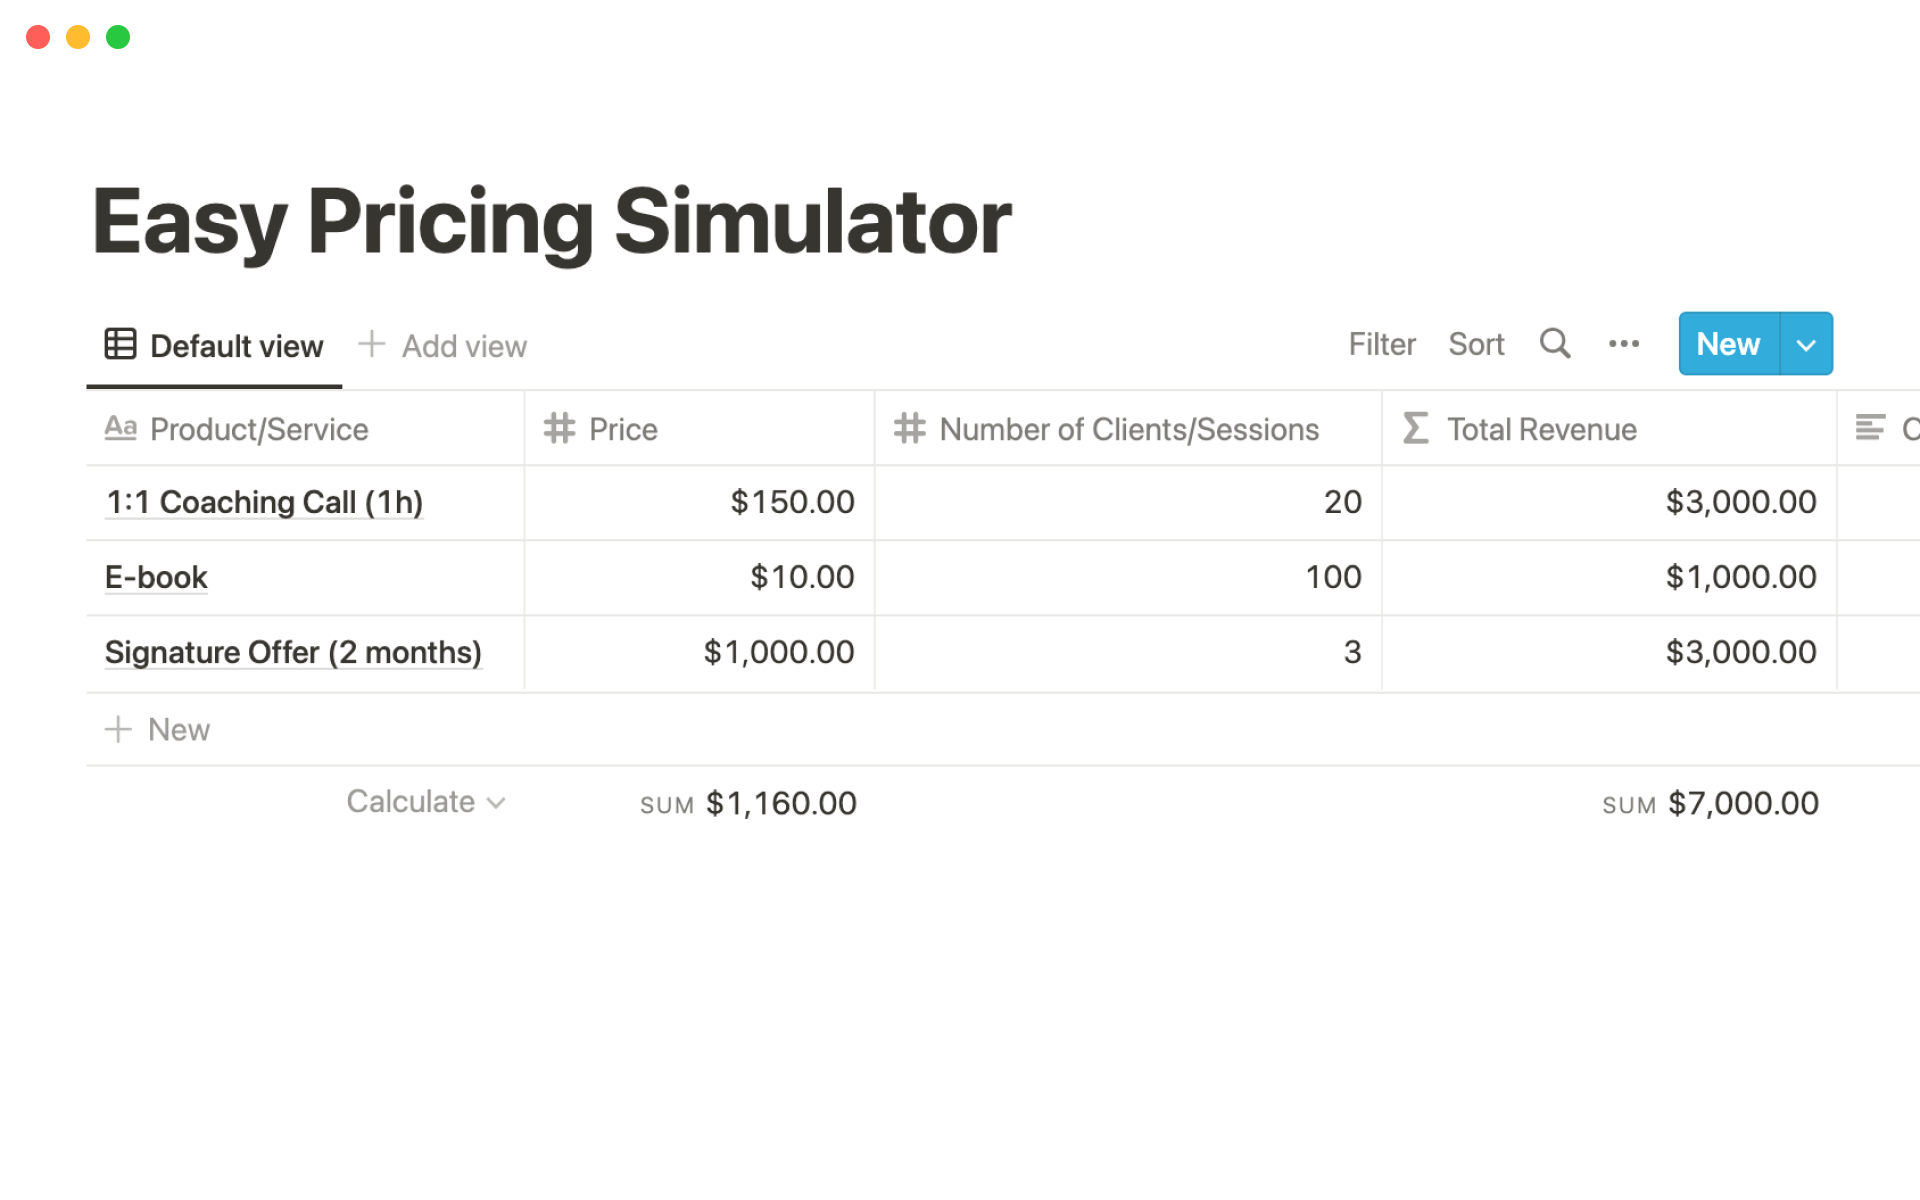 Helps freelancers calculate their prices and see and overview of their income and expenses.